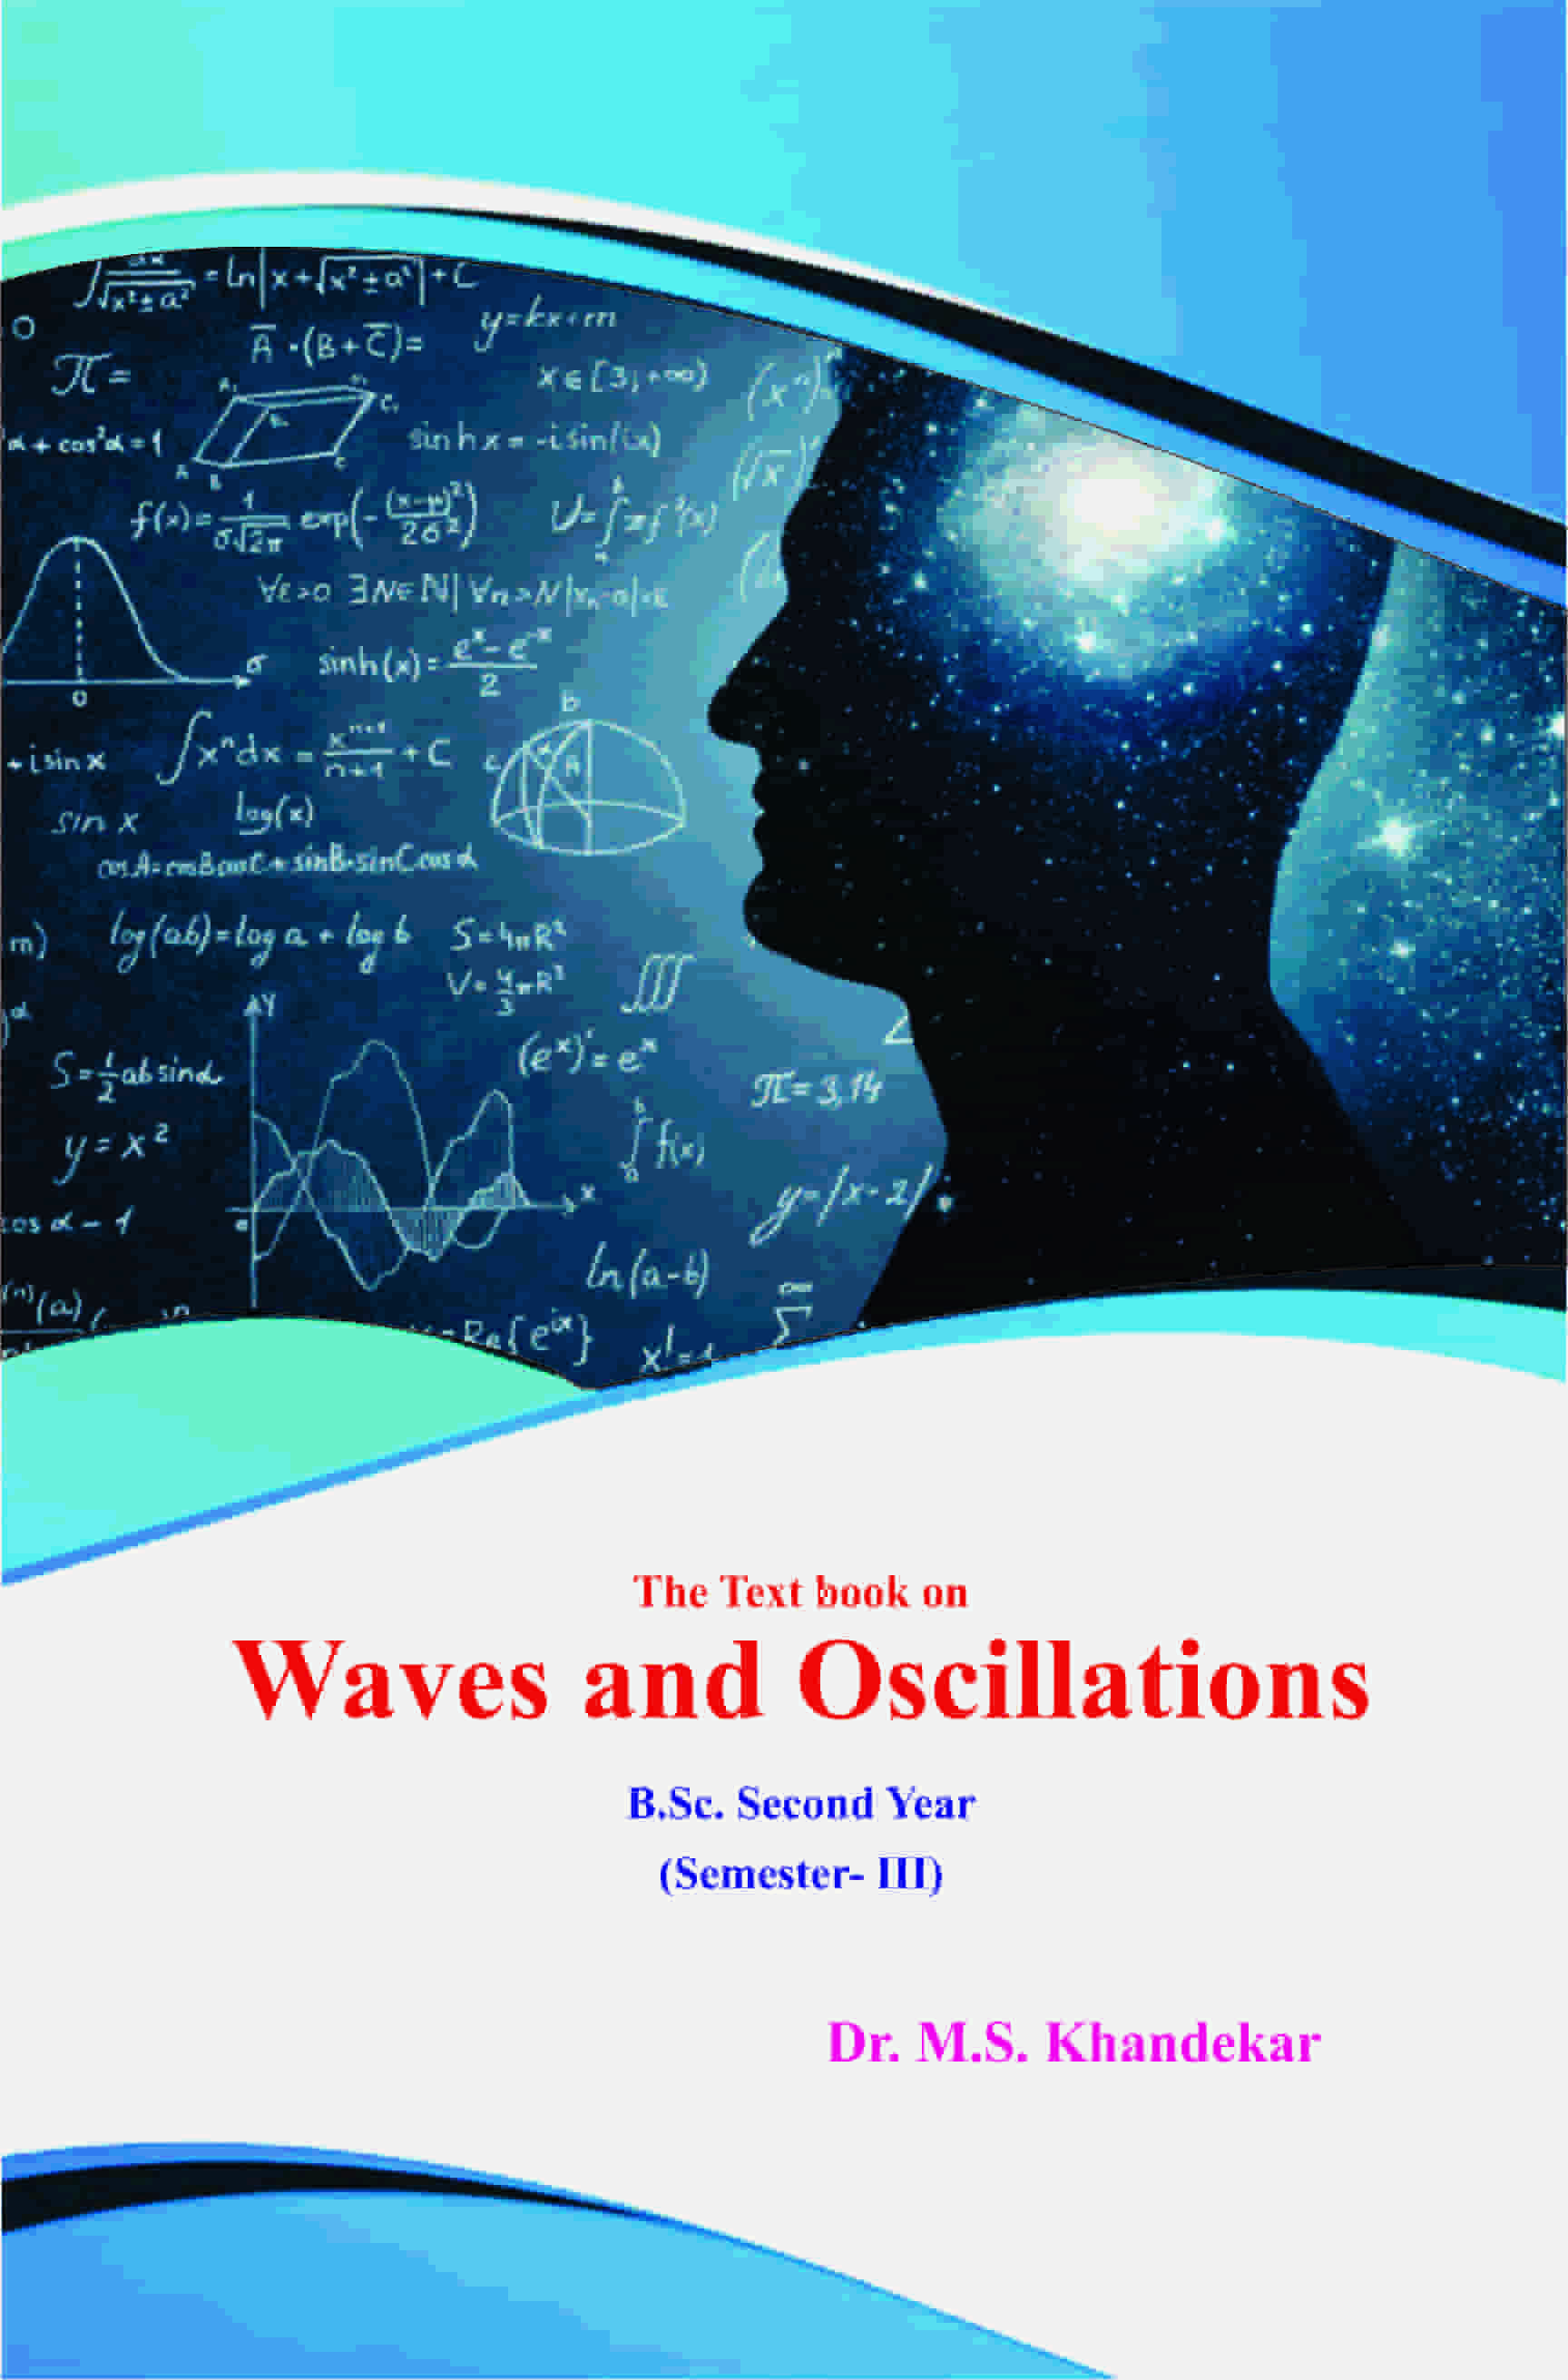 The Text book on Waves and Oscillations